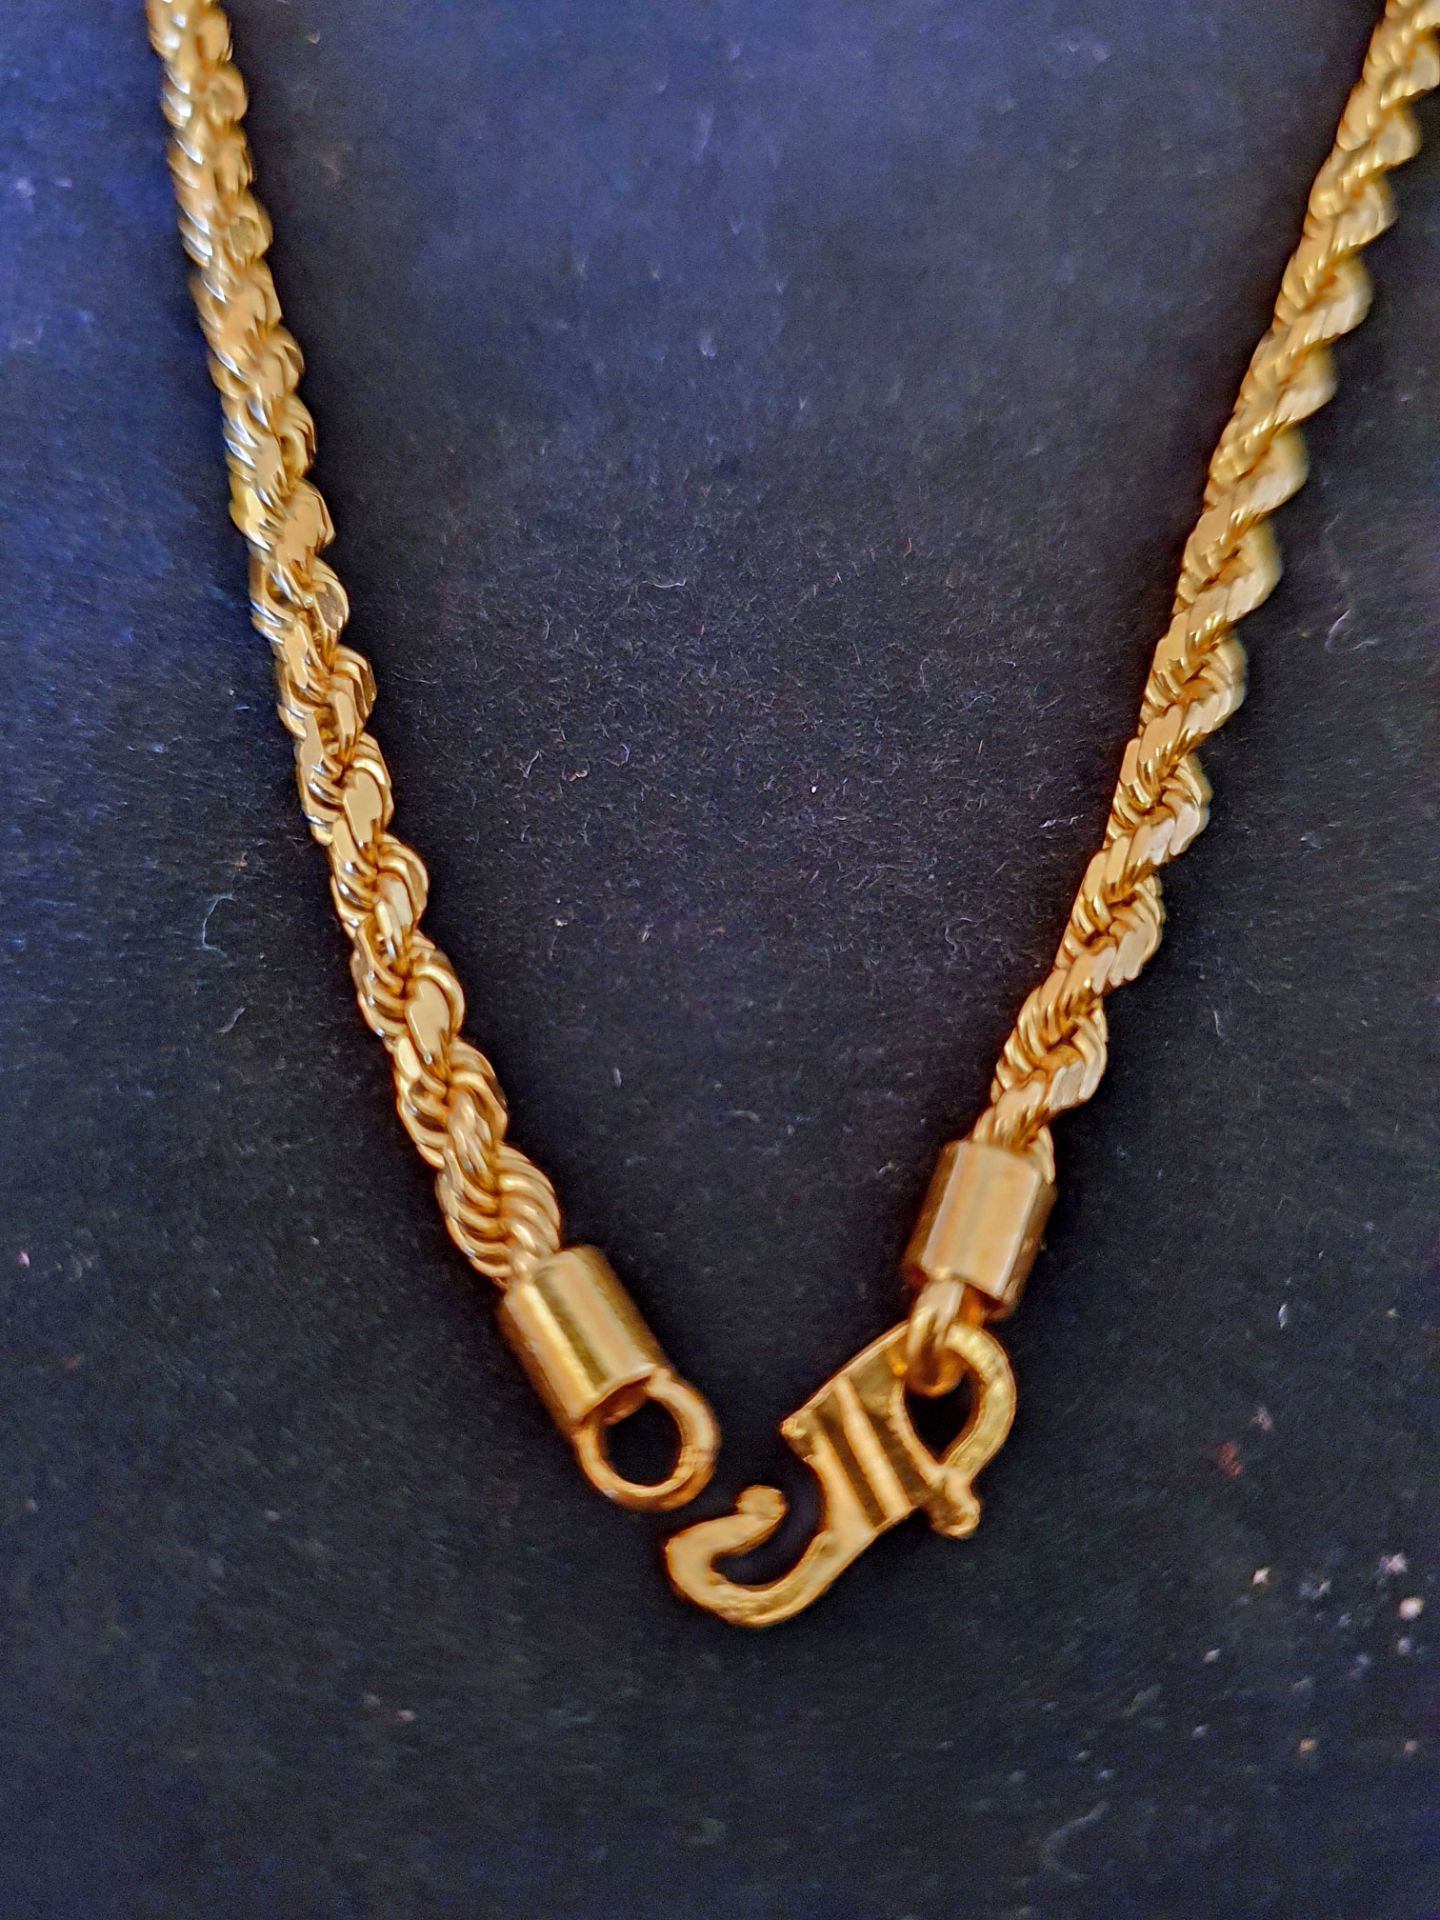 76cm Gold Rope Link Necklace with Hook Clasp. 35.310 grams - Image 3 of 5